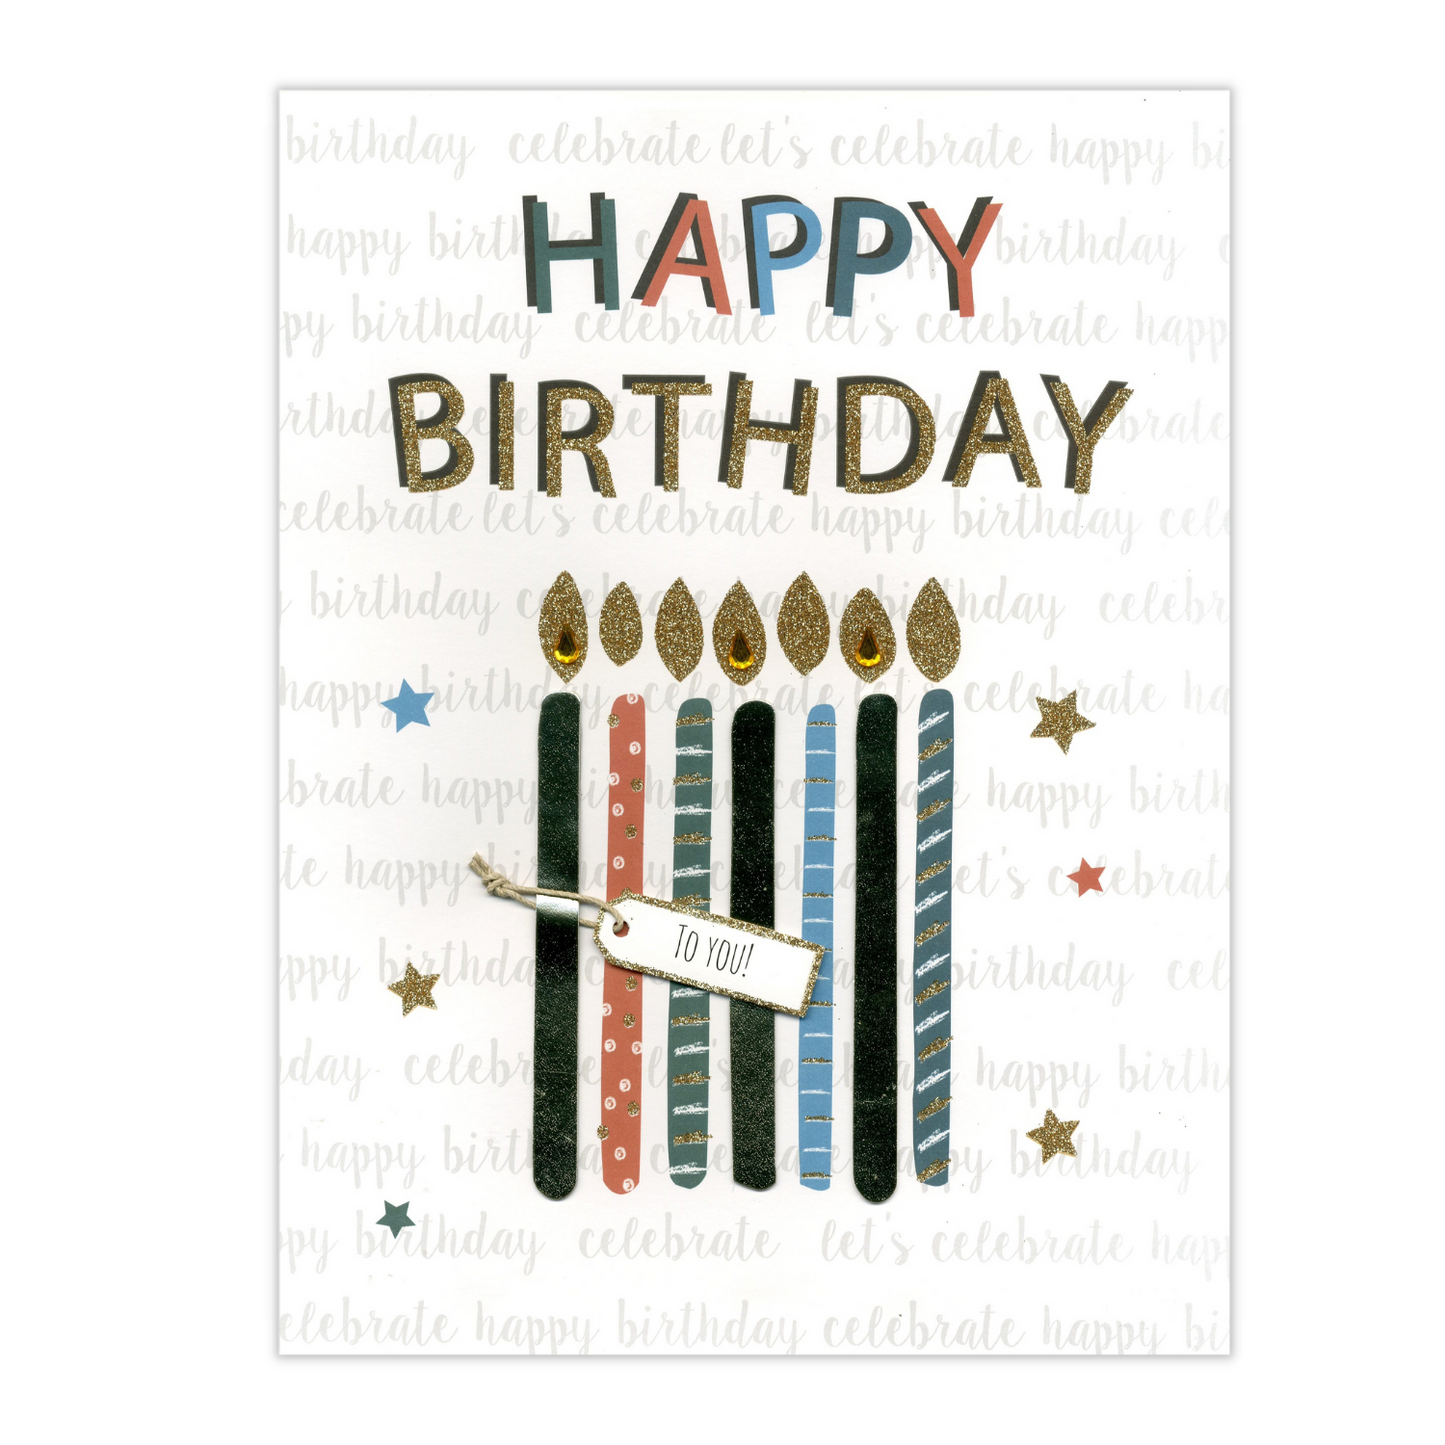 Large Embellished A4 Glitter Candles Birthday Card